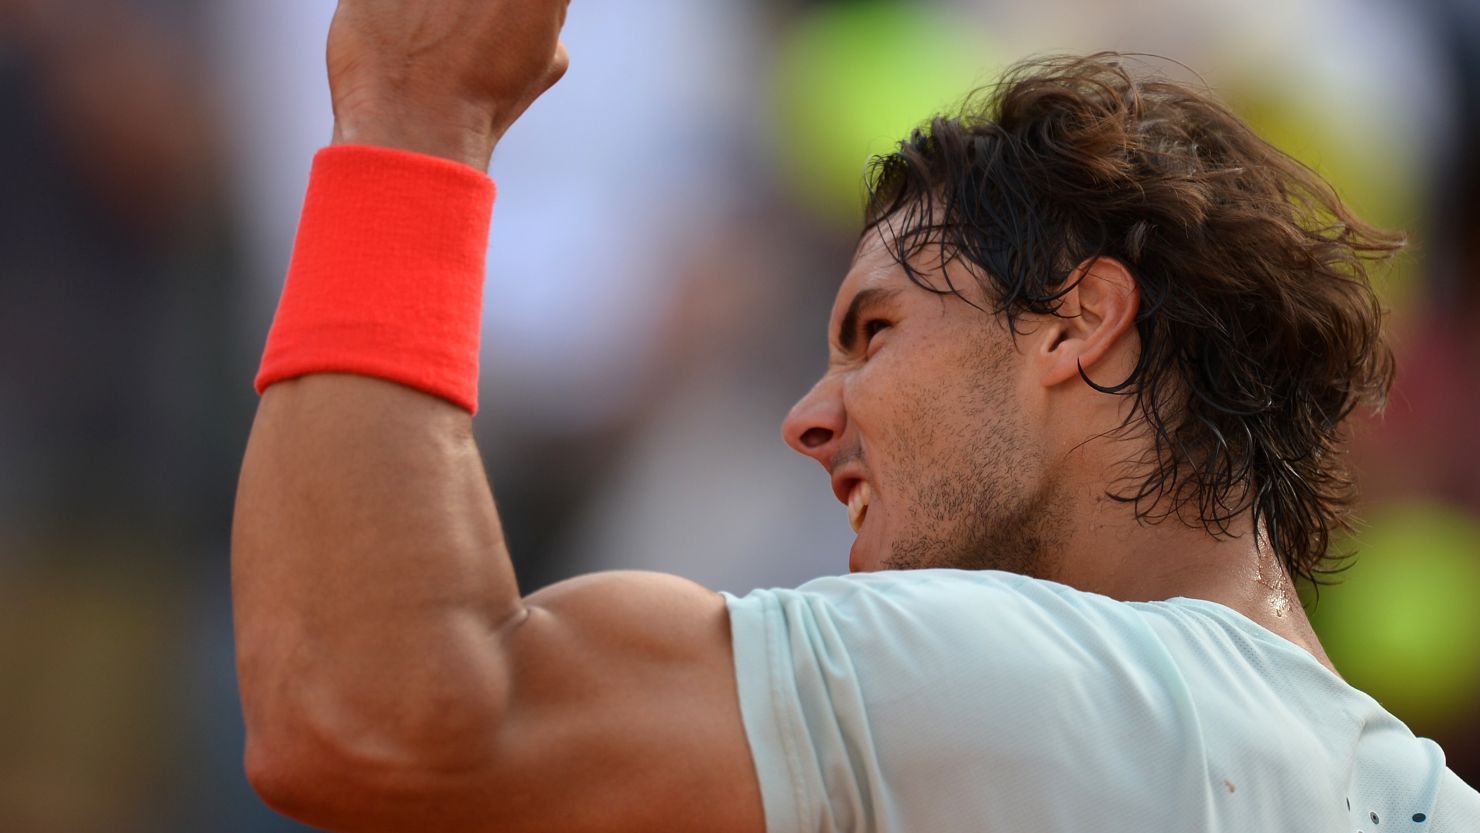 Power play: Nadal outmuscled Berdych to reach the Rome Masters final.